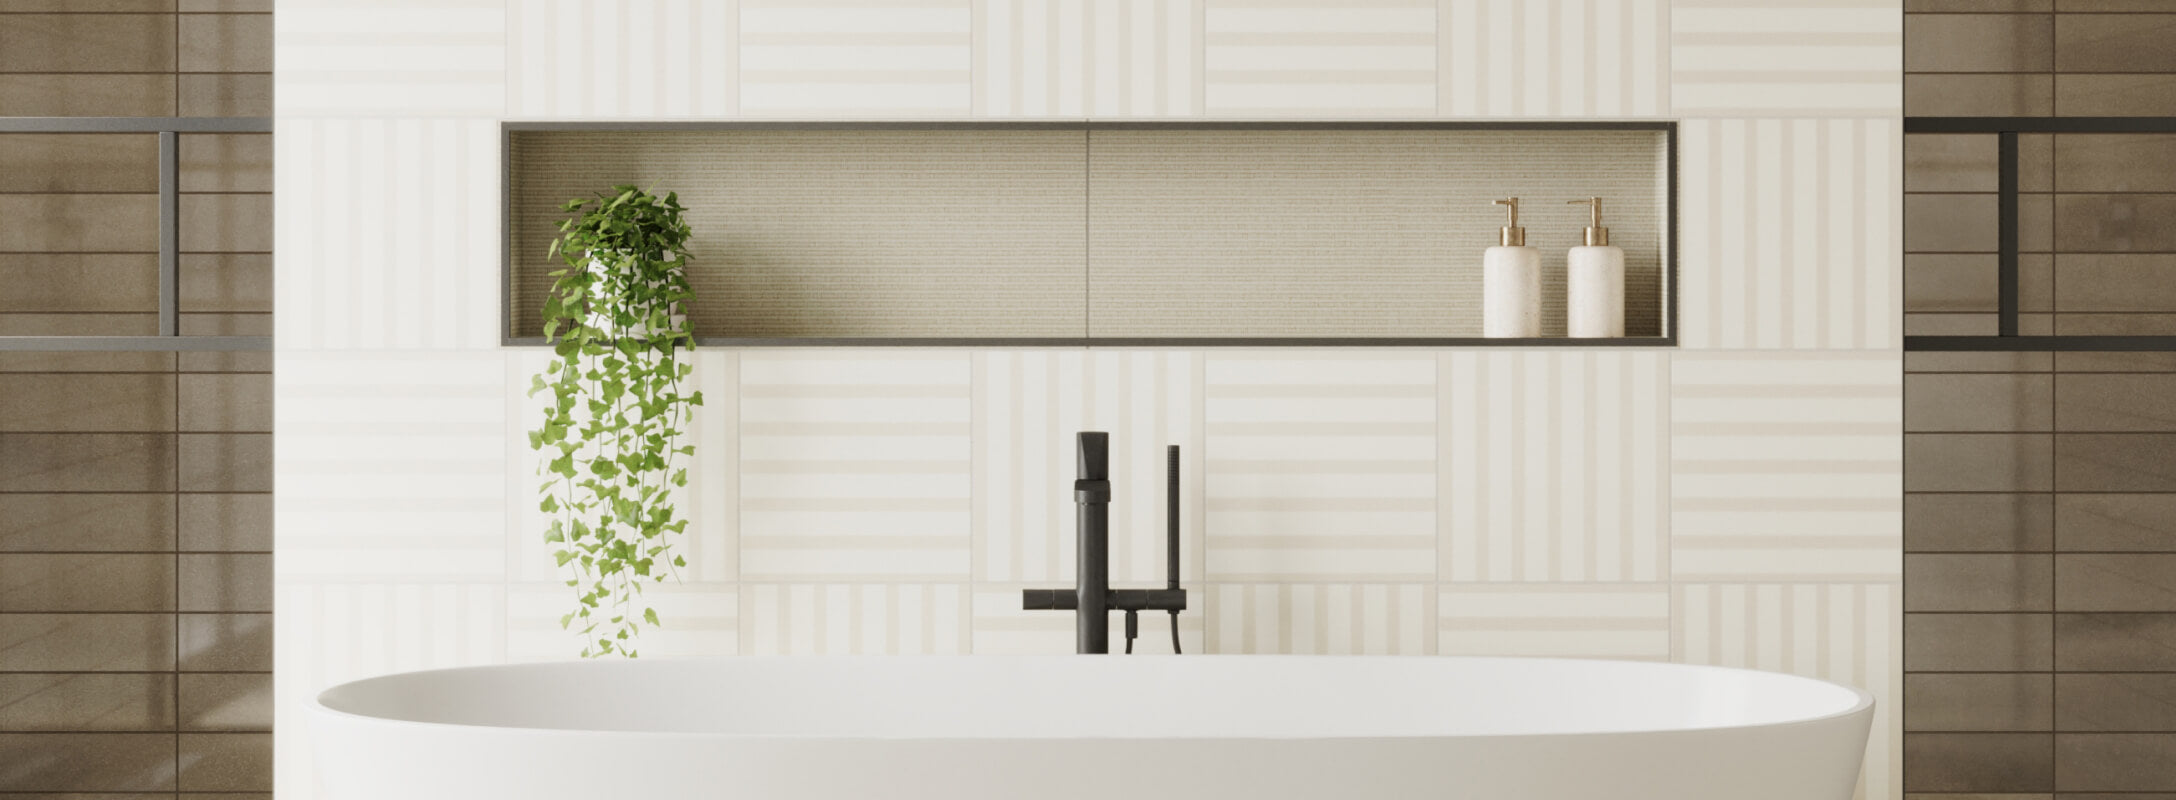 Contemporary bathroom featuring a seamless blend of cream and beige striped tiles, with a modern black faucet, elegant white soap dispensers, and a lush hanging green plant